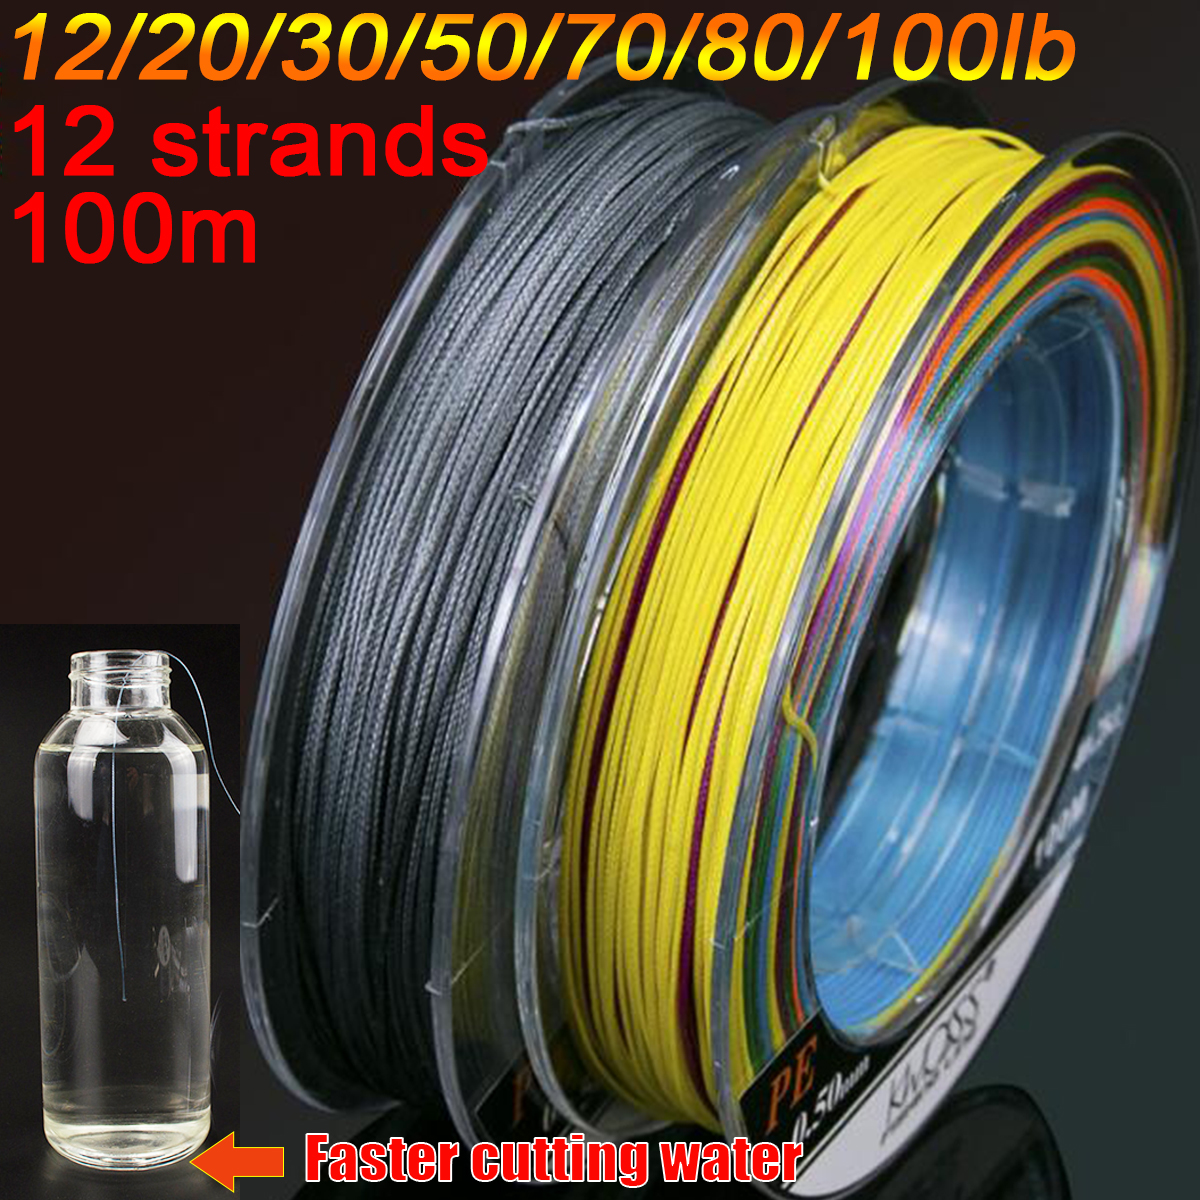 Braided-Fishing-Line-12-Strands-100m-Super-Strong-PE-Braided-12-100LB-Silver-1553648-8